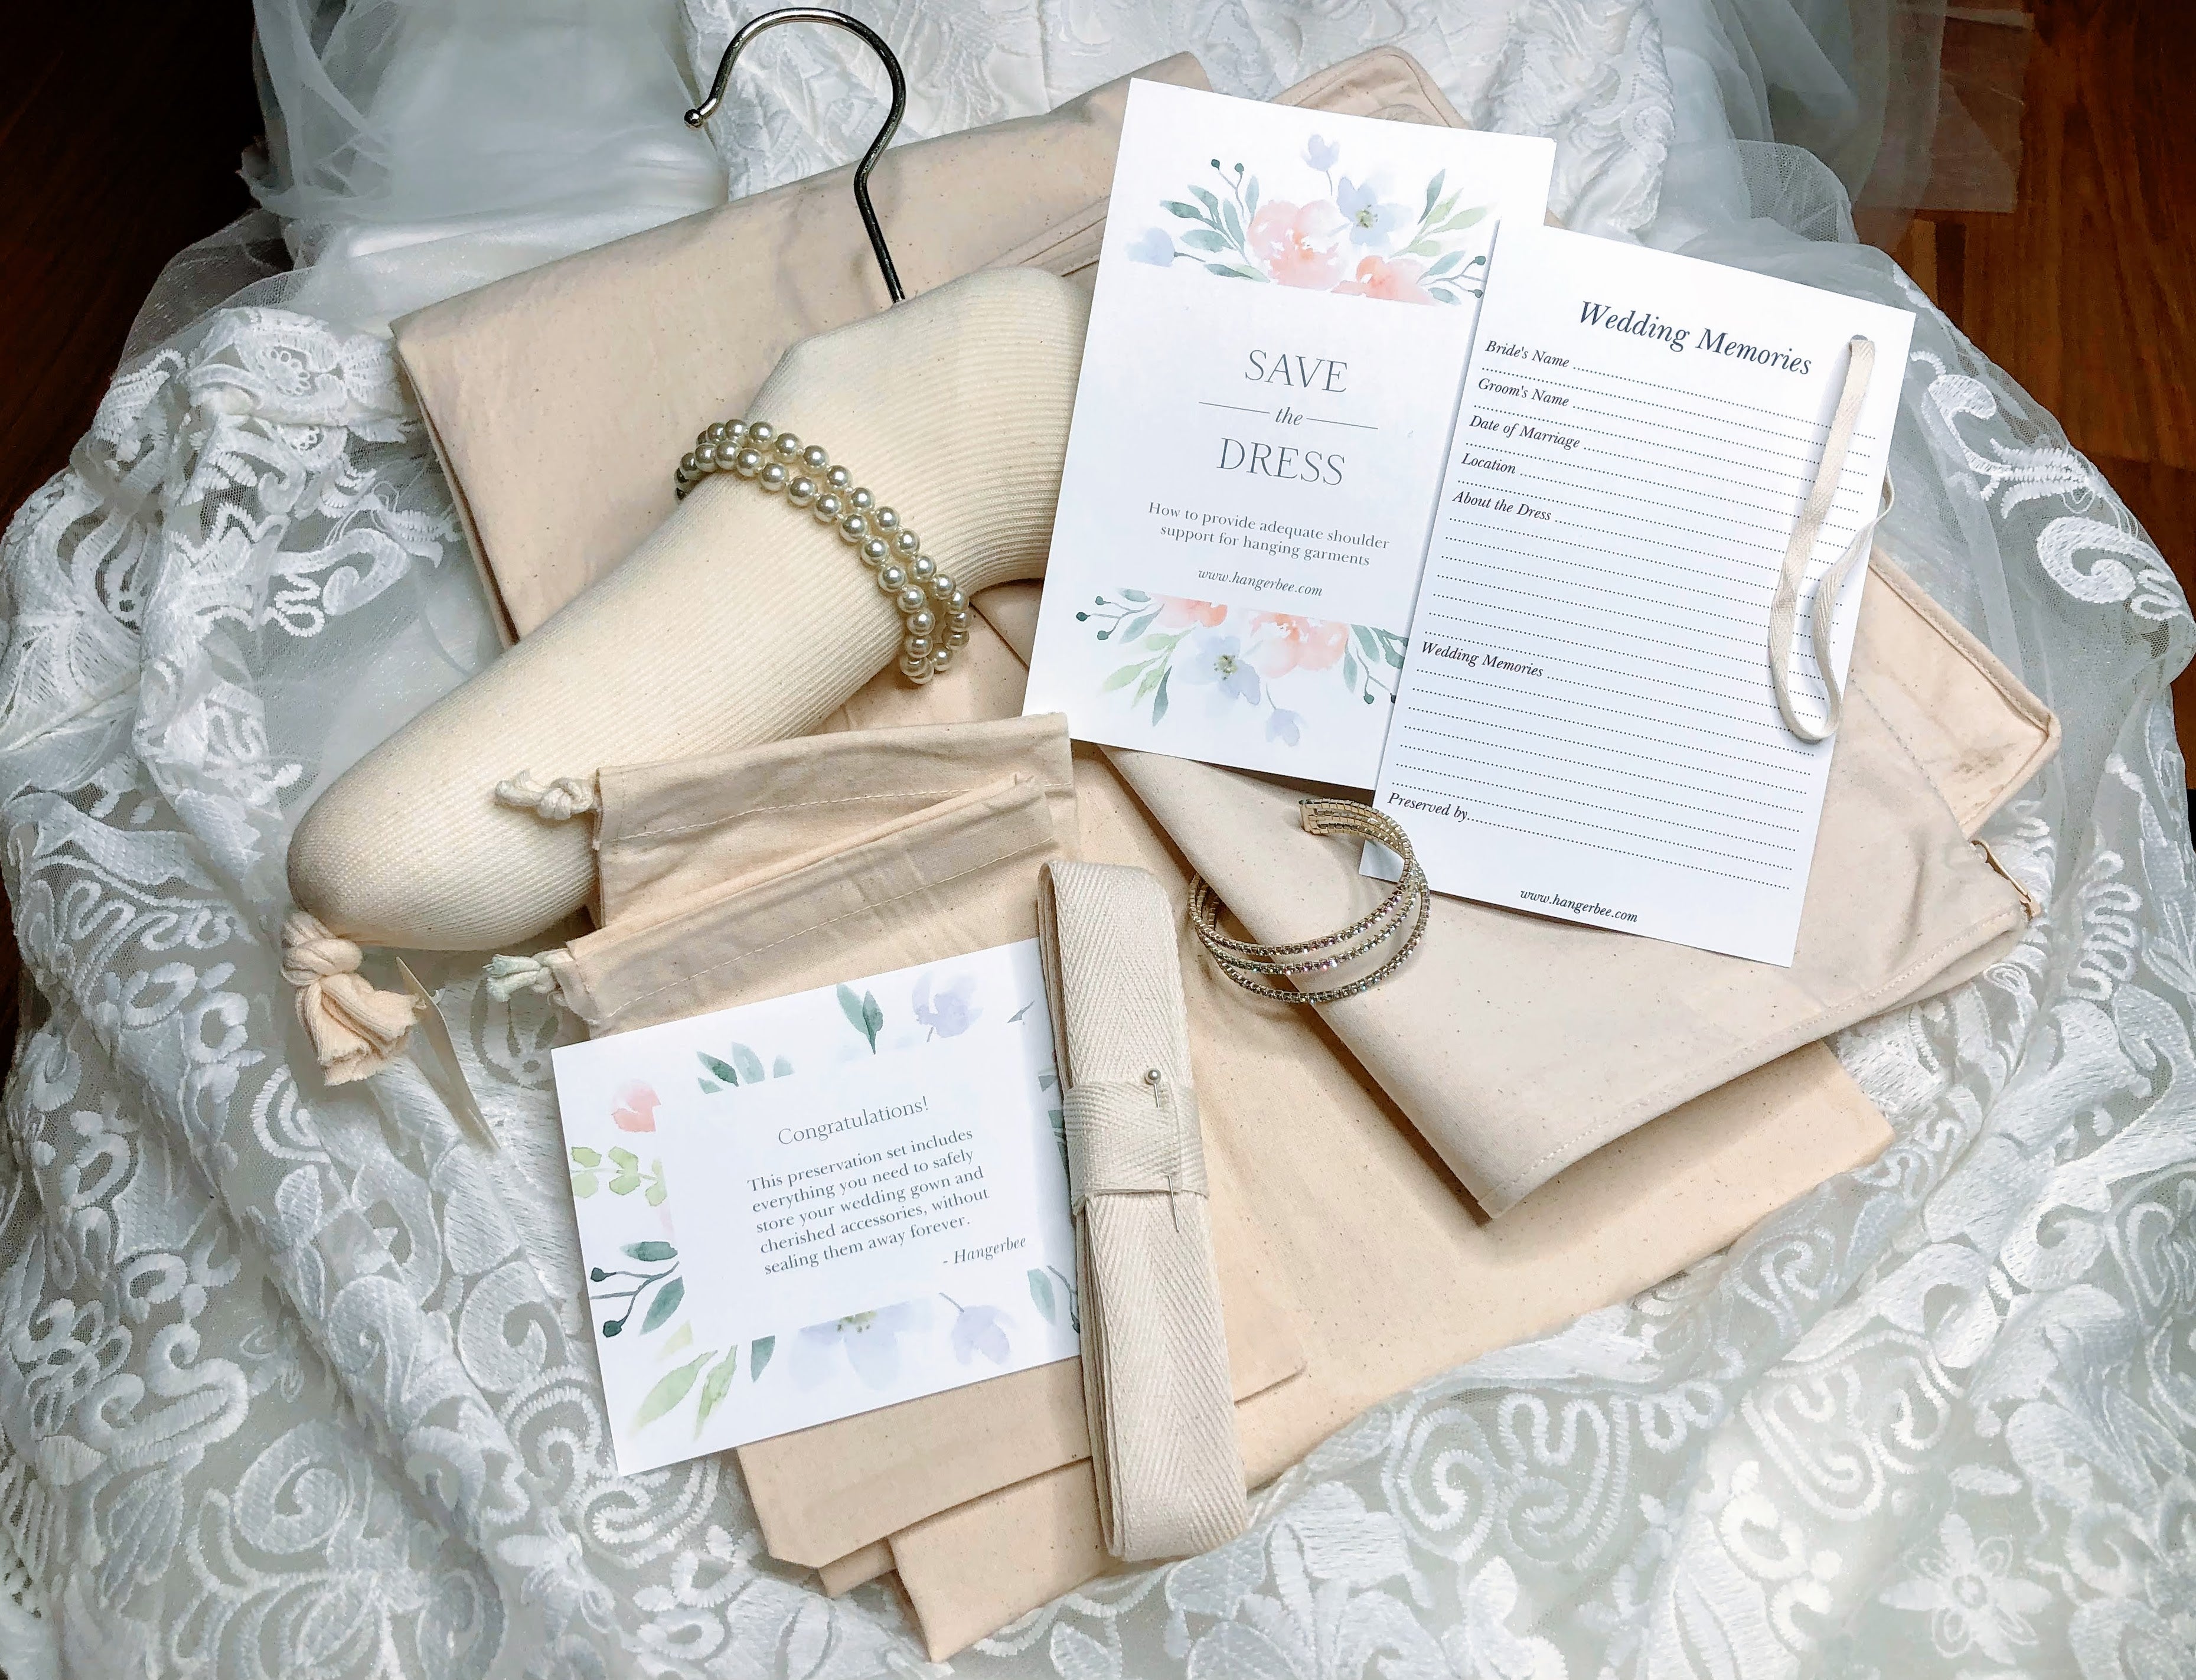 Celebrity Wedding Gown Preservation Services Kit – Shipping